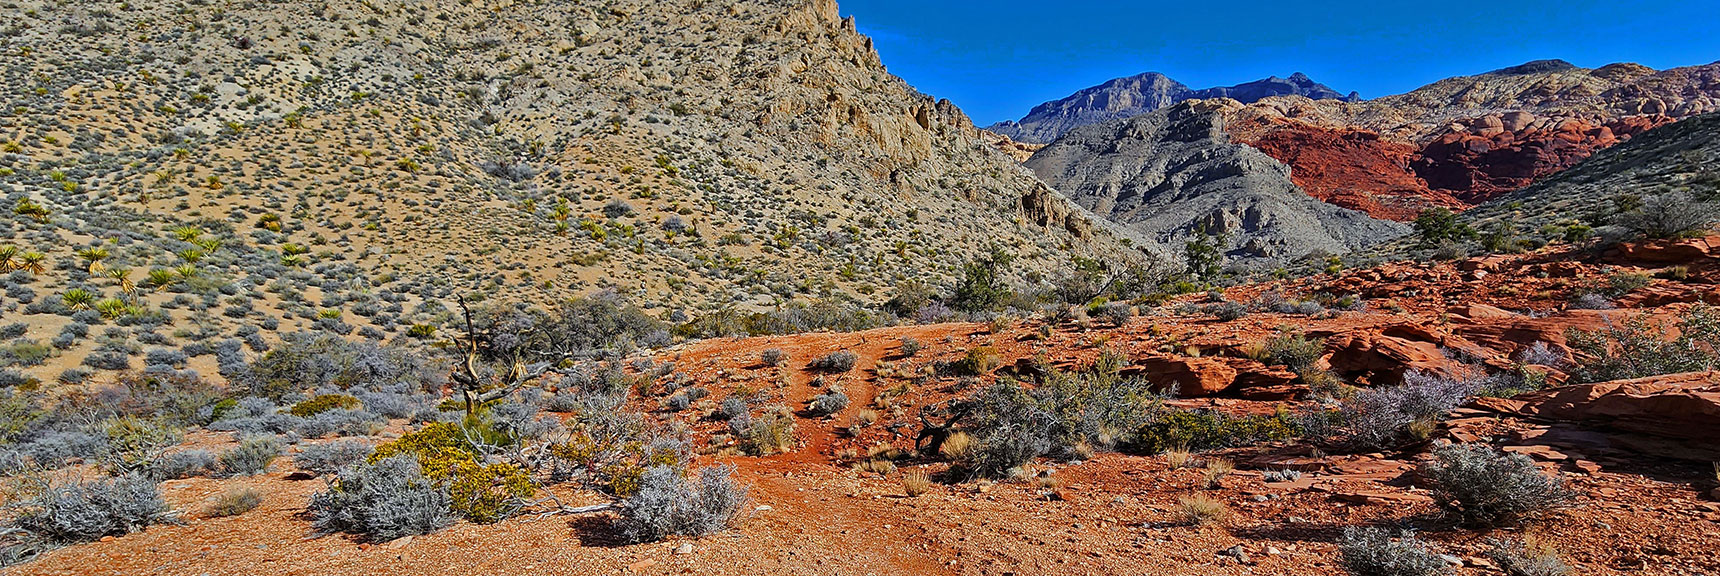 Intersection of the Ash Canyon and Rattlesnake Trails Ahead. Take a Left Toward Calico Tanks. | Ash Canyon to Calico Tanks | Calico Basin and Red Rock Canyon, Nevada | David Smith | Las Vegas Area Trails